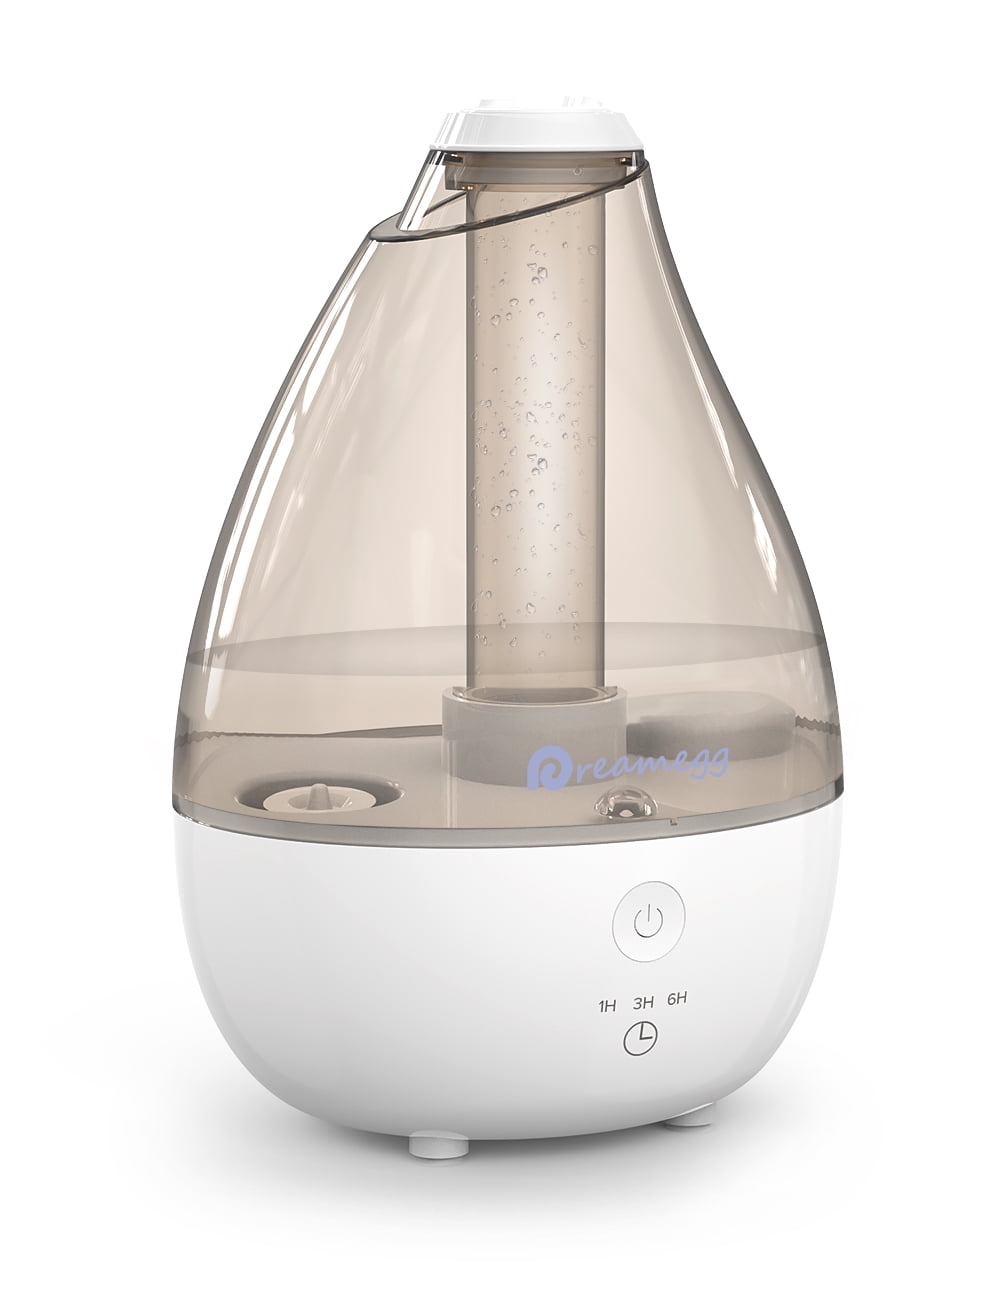  Dreamzy Humidifier,Dreamzy Ultrasonic Cool Mist Humidifier  500ml - Quiet Air Humidifier for Bedroom with Streaming Light, Easy Clean,  Filterless Design (White) : Home & Kitchen